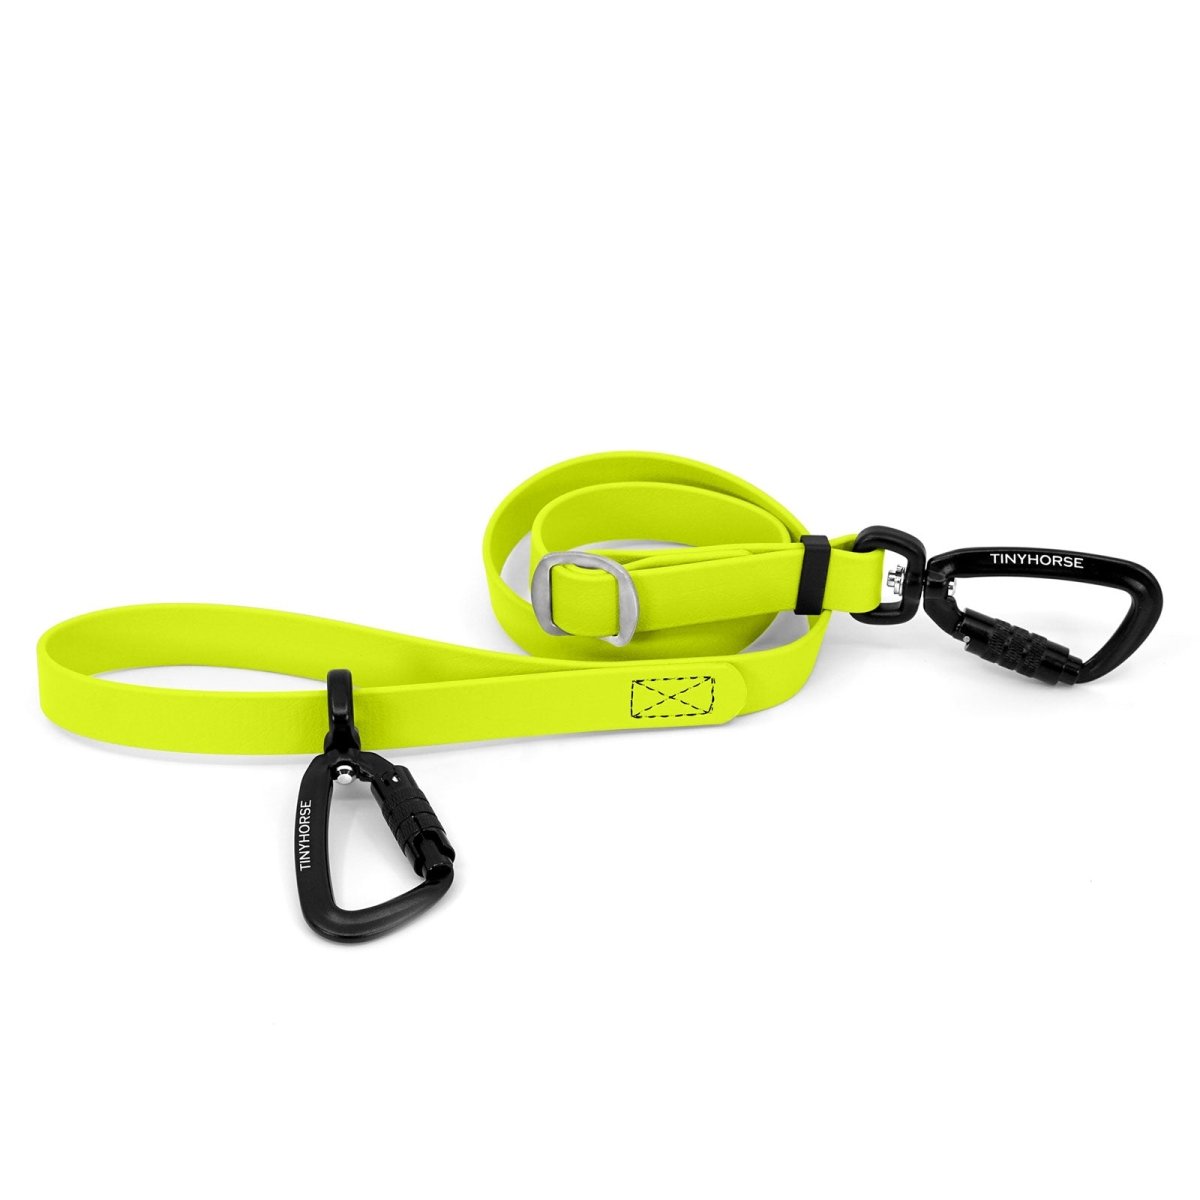 An adjustable neon yellow-coloured Lead-All Pro made of BioThane with 2 auto-locking carabiners